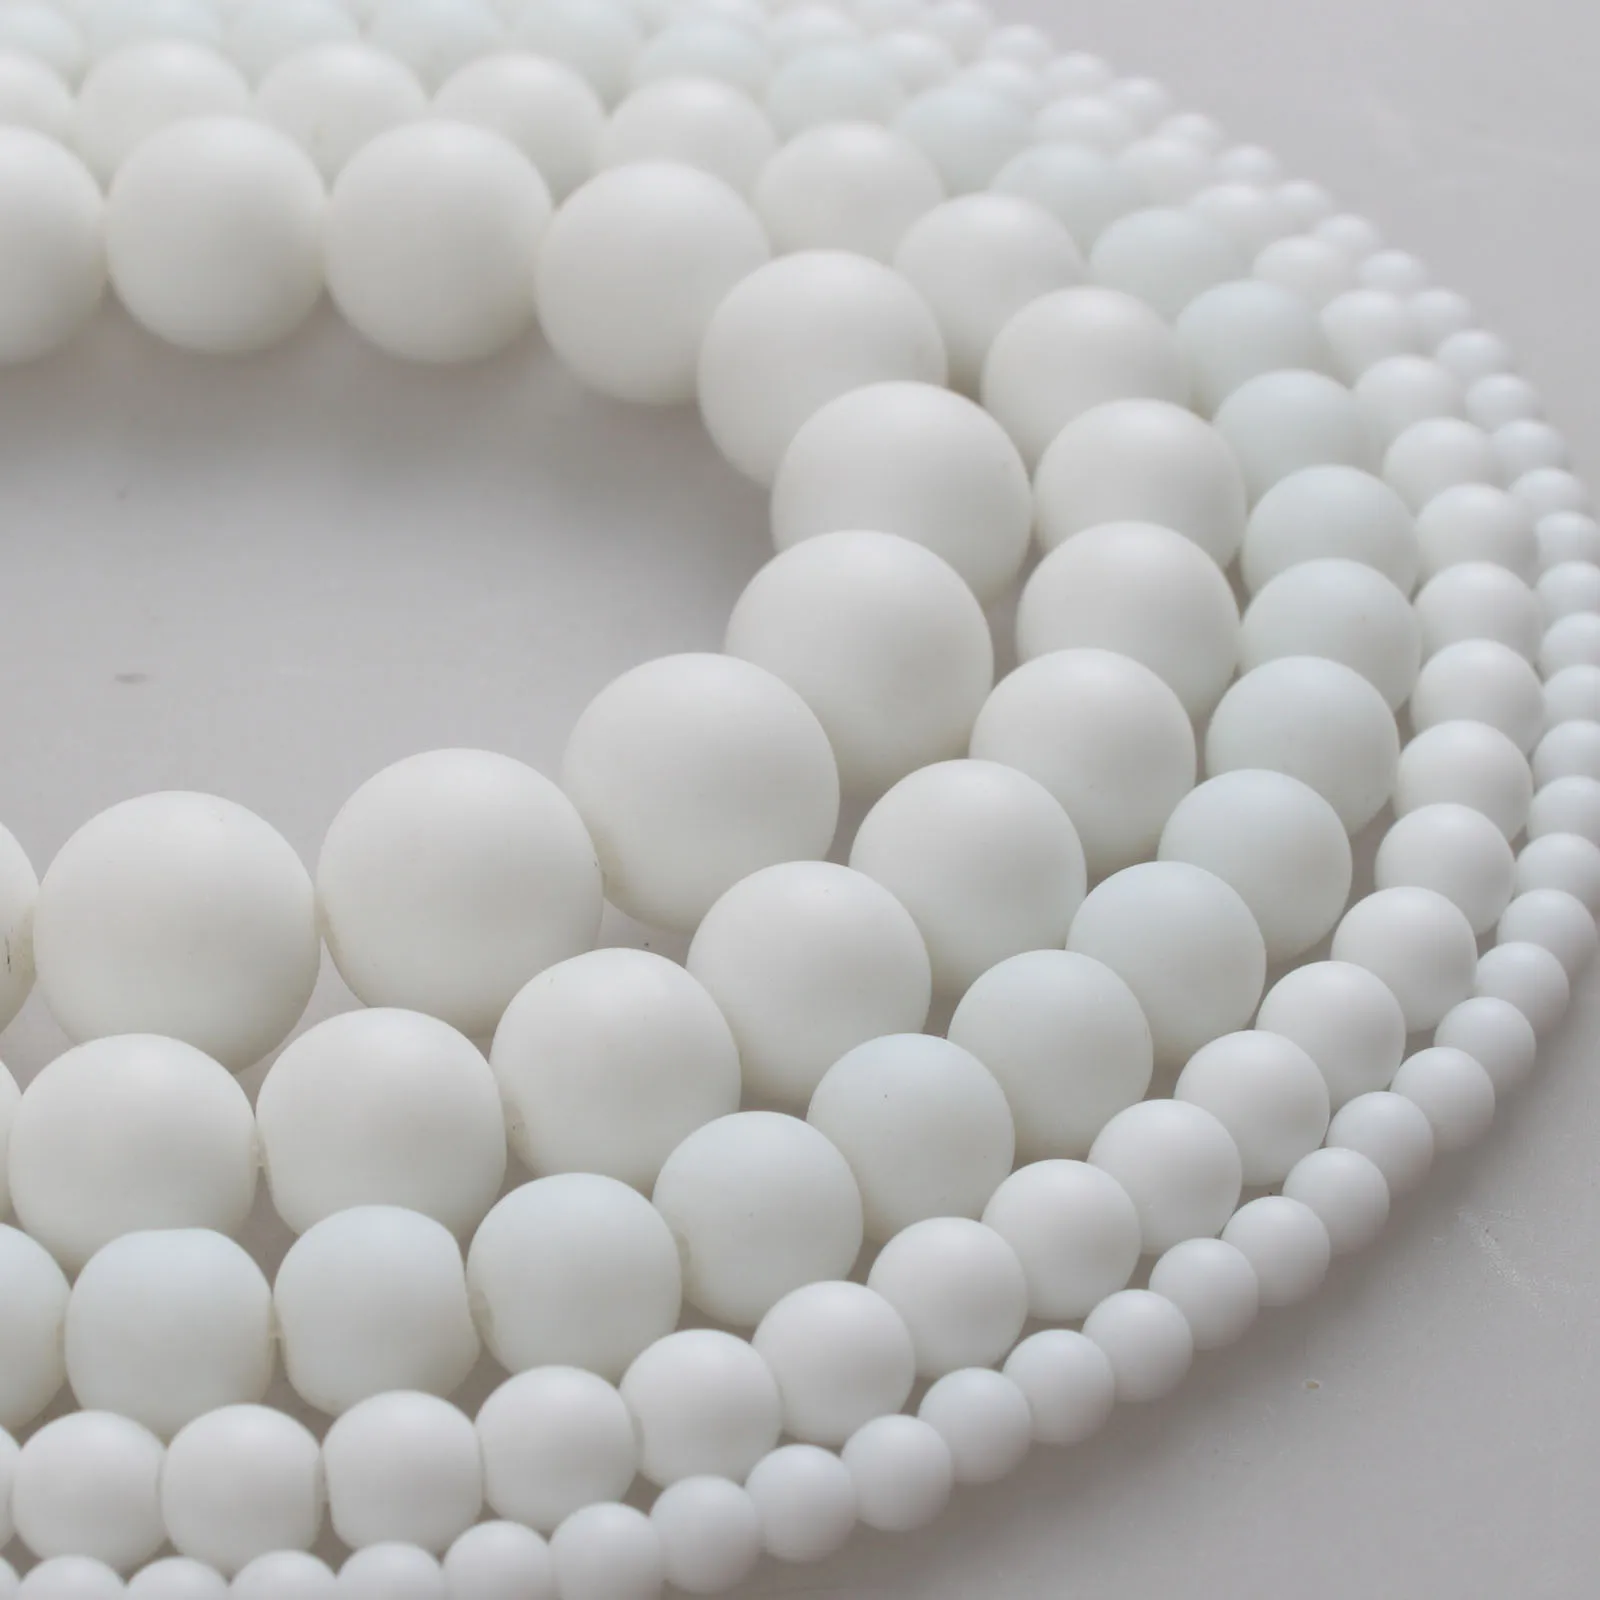 Natural Stone Beads Matted White Porcelain Frosted Ceramic Round Loose Beads 4 6 8 10 12mm For Bracelets Necklace Jewelry Making